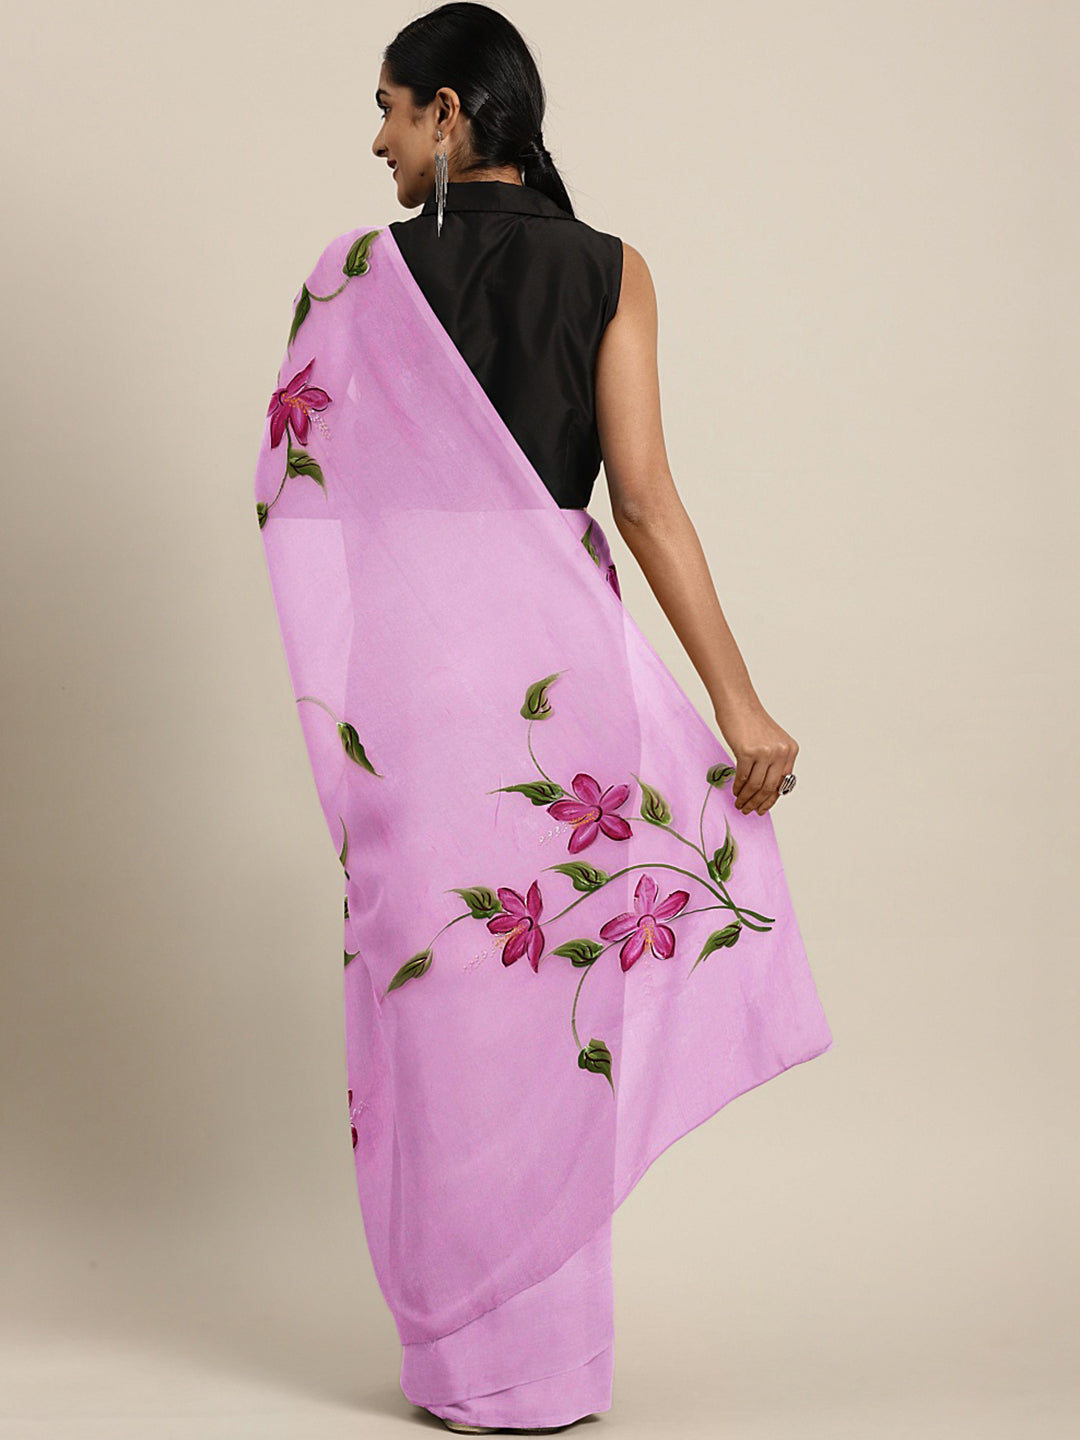 Kalakari India Organza Hand Painted Saree With Blouse BHKPSA0173-Saree-Kalakari India-BHKPSA0173-Bollywood, Fashion, Geographical Indication, Hand Crafted, Heritage Prints, Natural Dyes, Organza, Sarees, Sustainable Fabrics, Woven-[Linen,Ethnic,wear,Fashionista,Handloom,Handicraft,Indigo,blockprint,block,print,Cotton,Chanderi,Blue, latest,classy,party,bollywood,trendy,summer,style,traditional,formal,elegant,unique,style,hand,block,print, dabu,booti,gift,present,glamorous,affordable,collectible,S